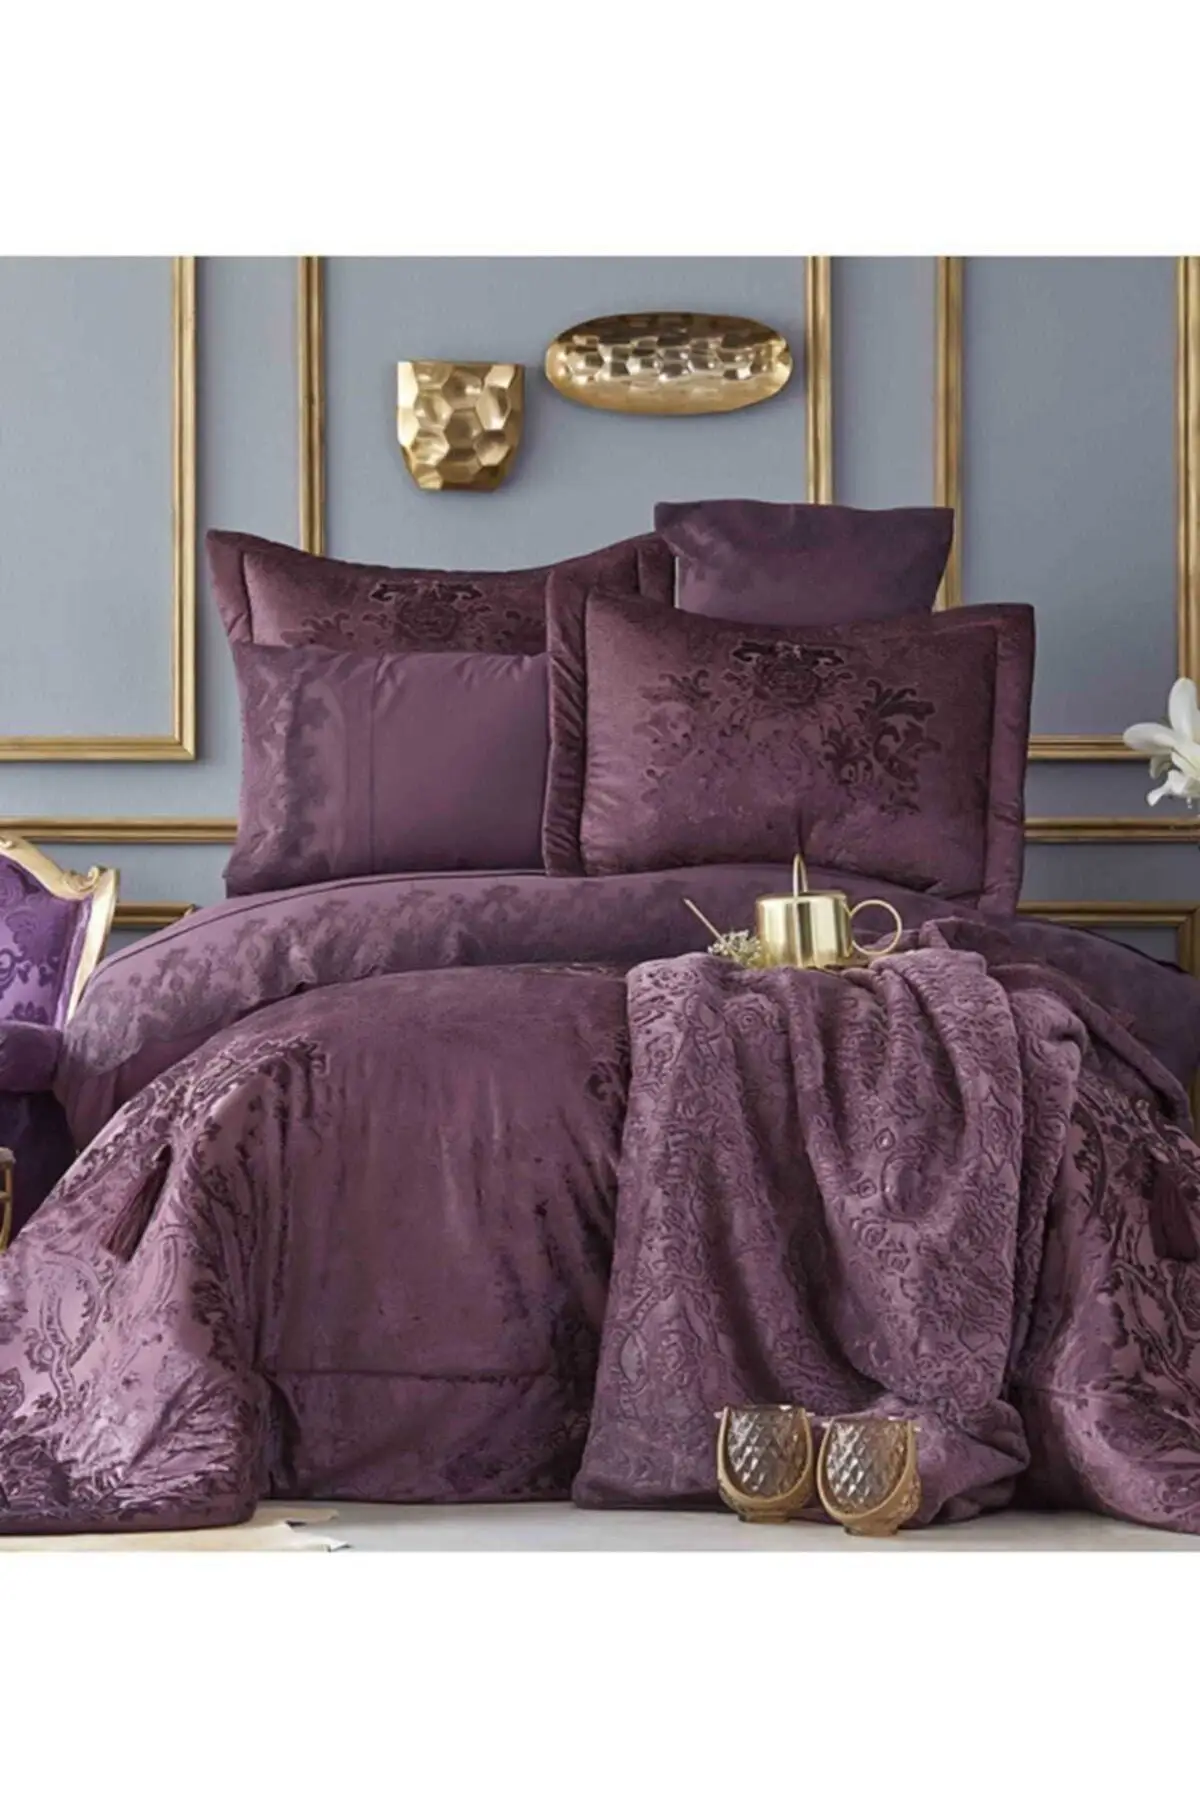 

Only for king 2021 duvet cover set Valeria Delux Damson 10 Piece Dowry Set